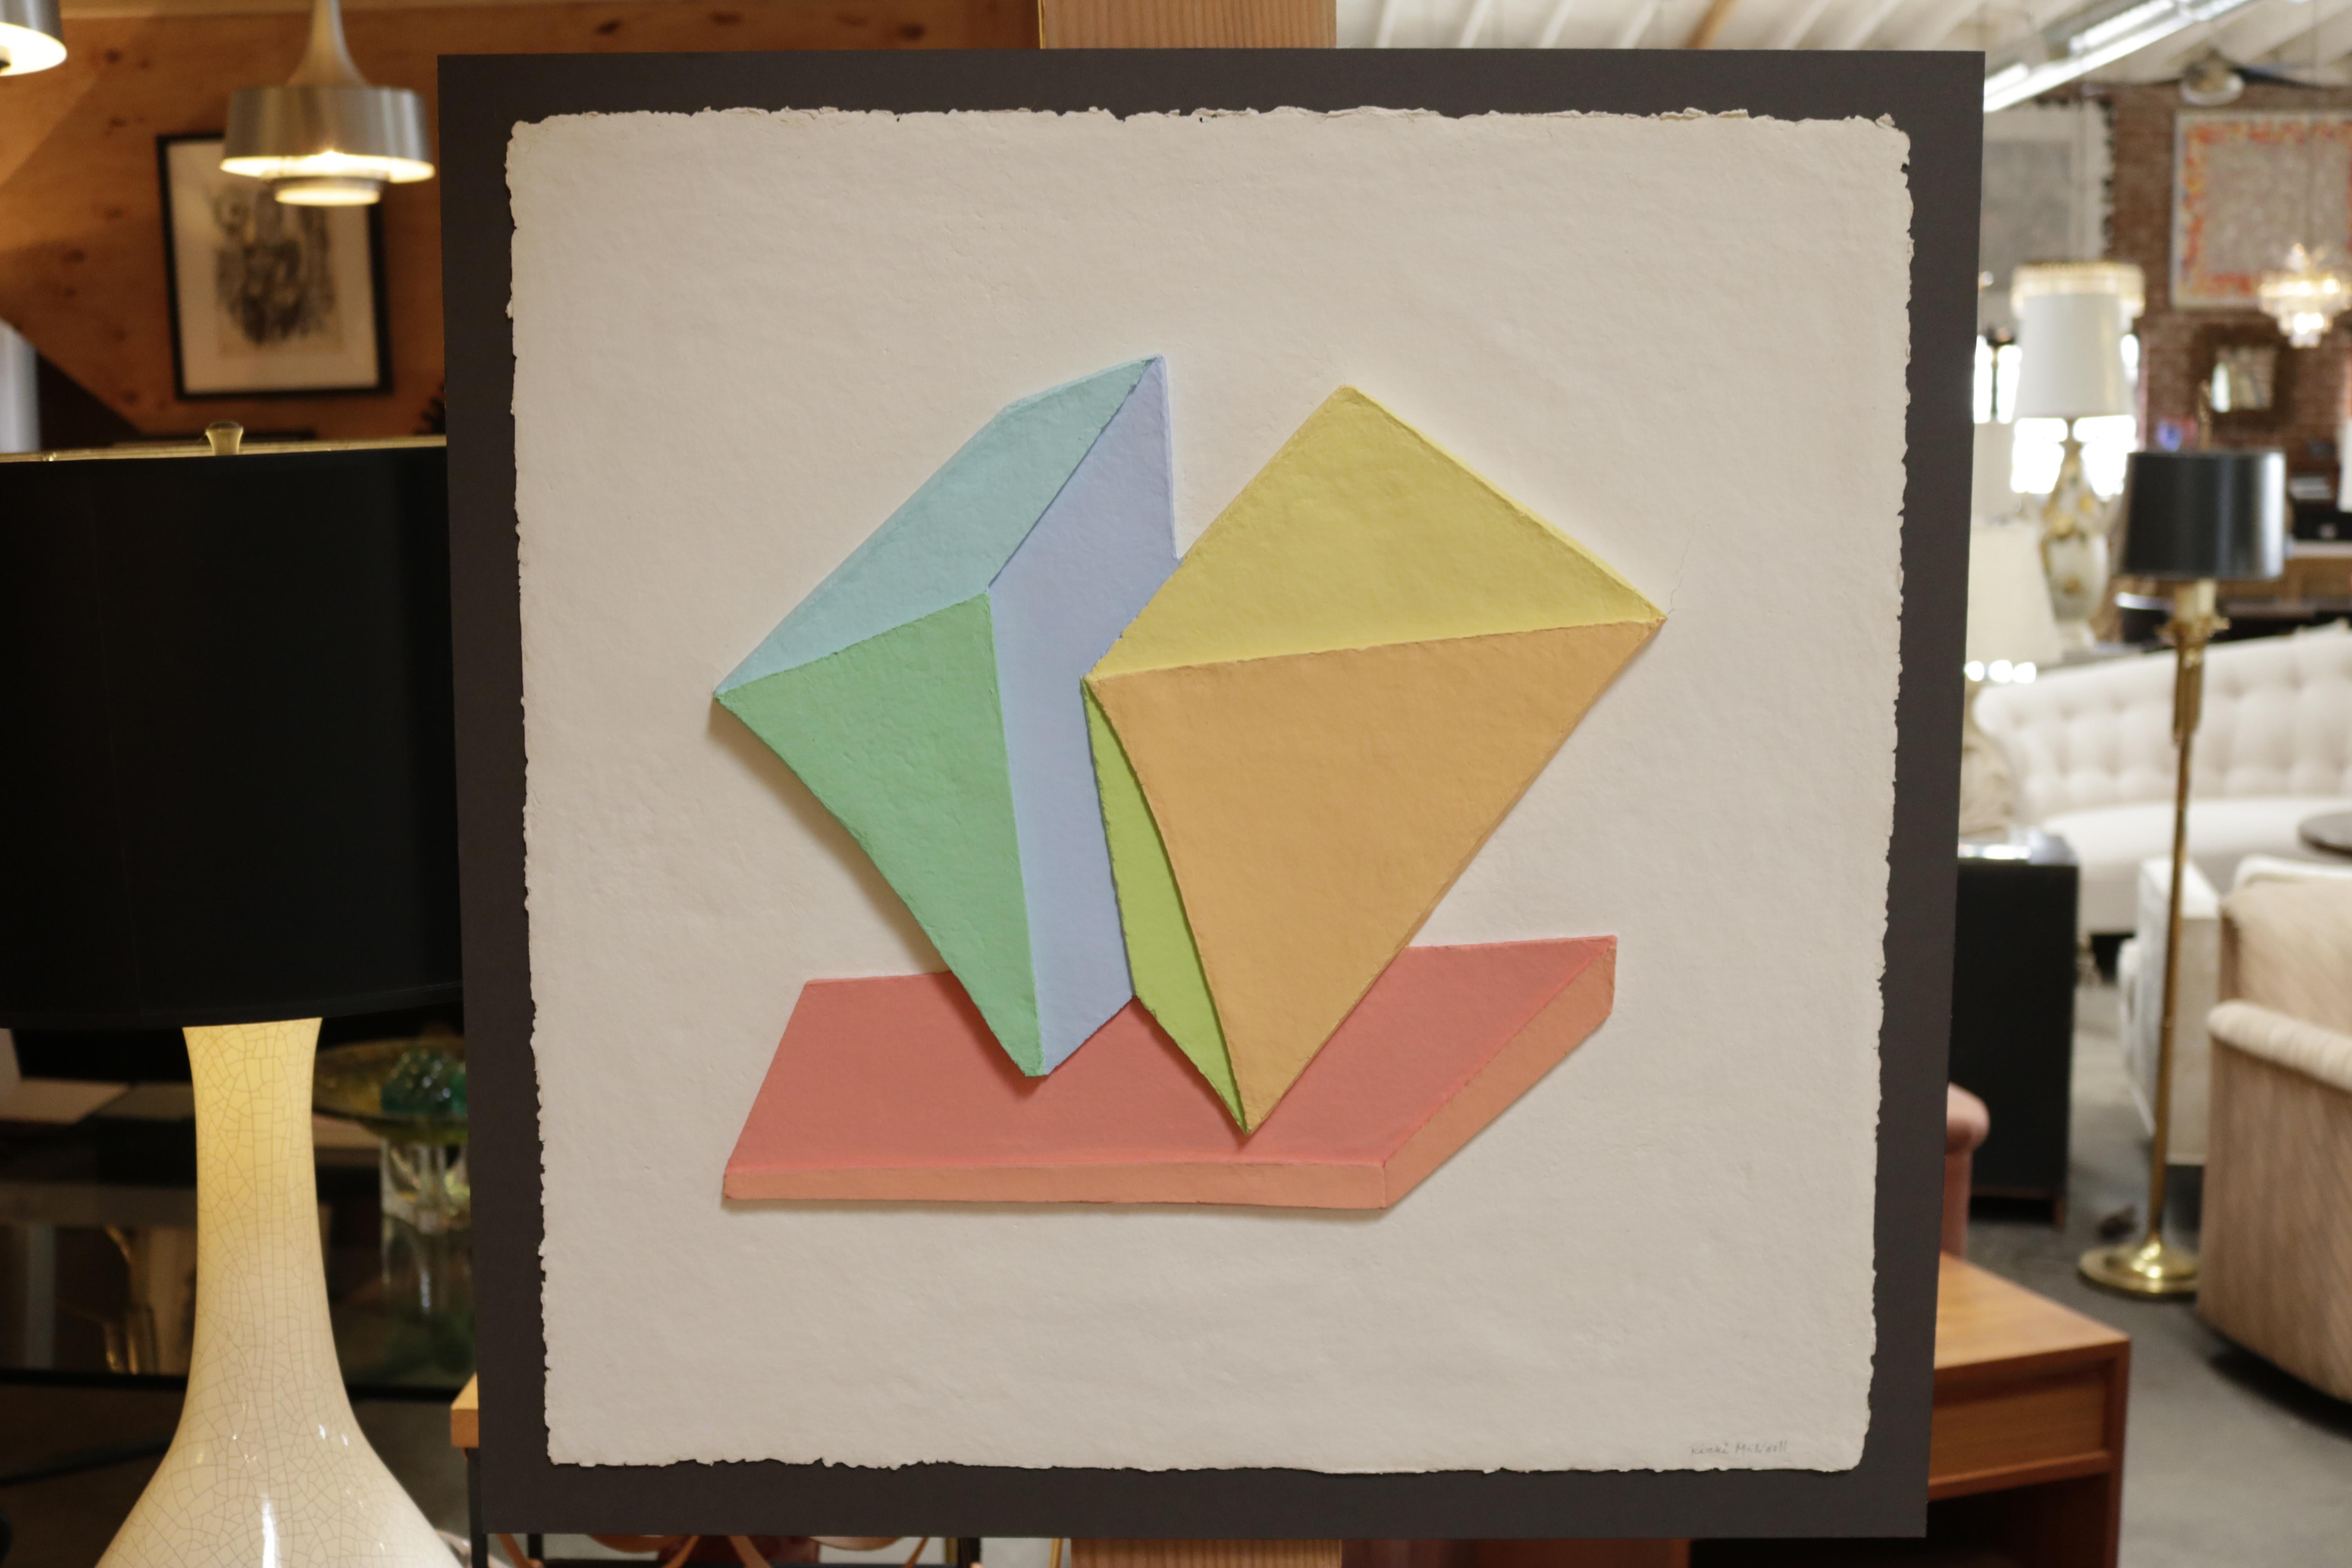 Geometric 3D collage painting by Ricki McNeill made with stacking paper sheets, gluing them together and dipping them in pastel watercolor then creating geometric shapes The art is enclosed in a Lucite box.

Ms. McNeill was a resident of Santa